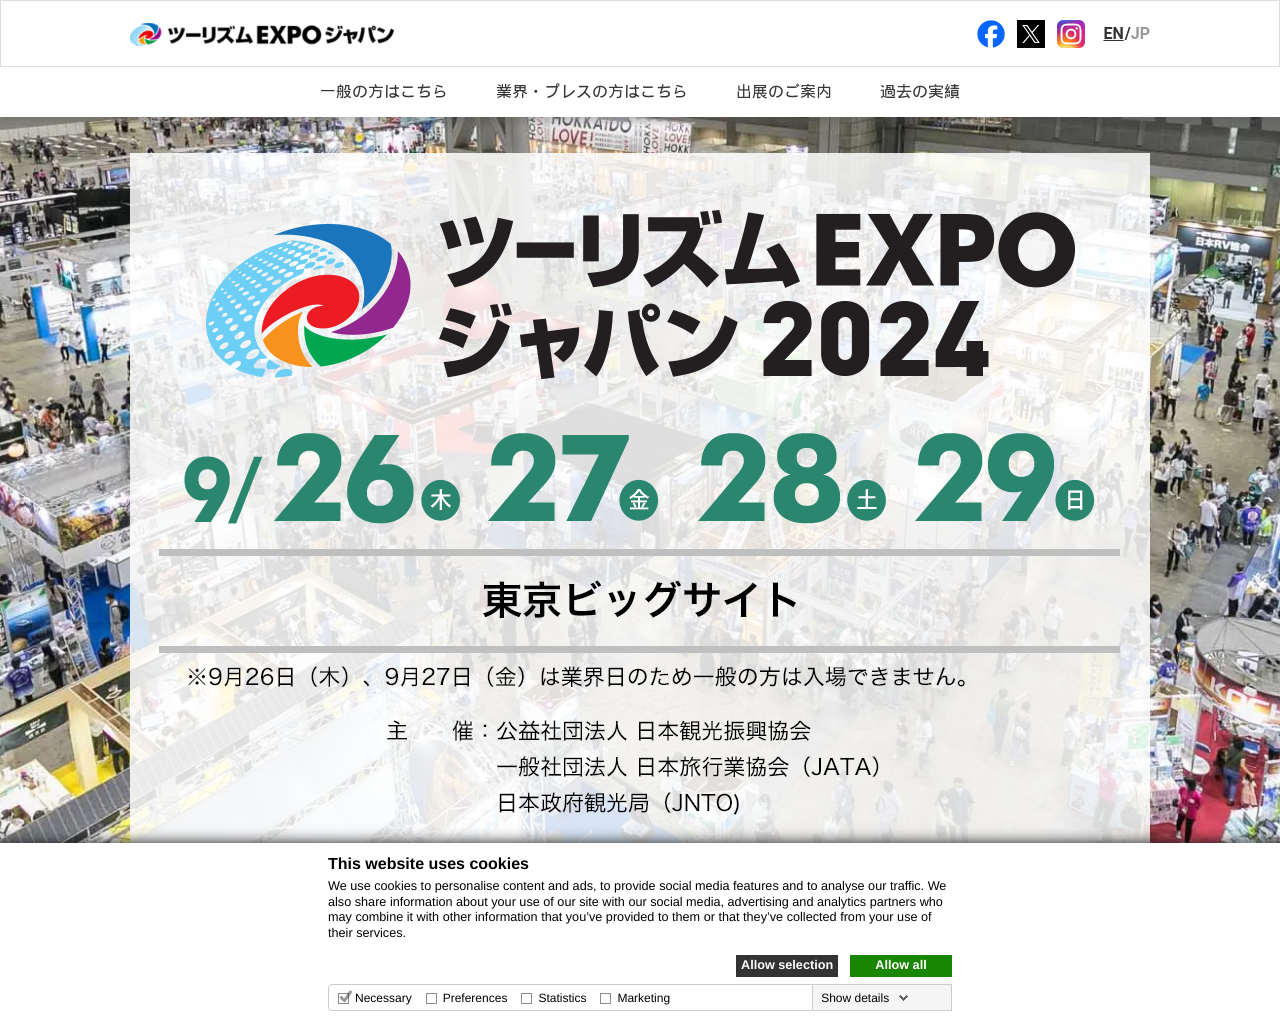 t-expo.jp